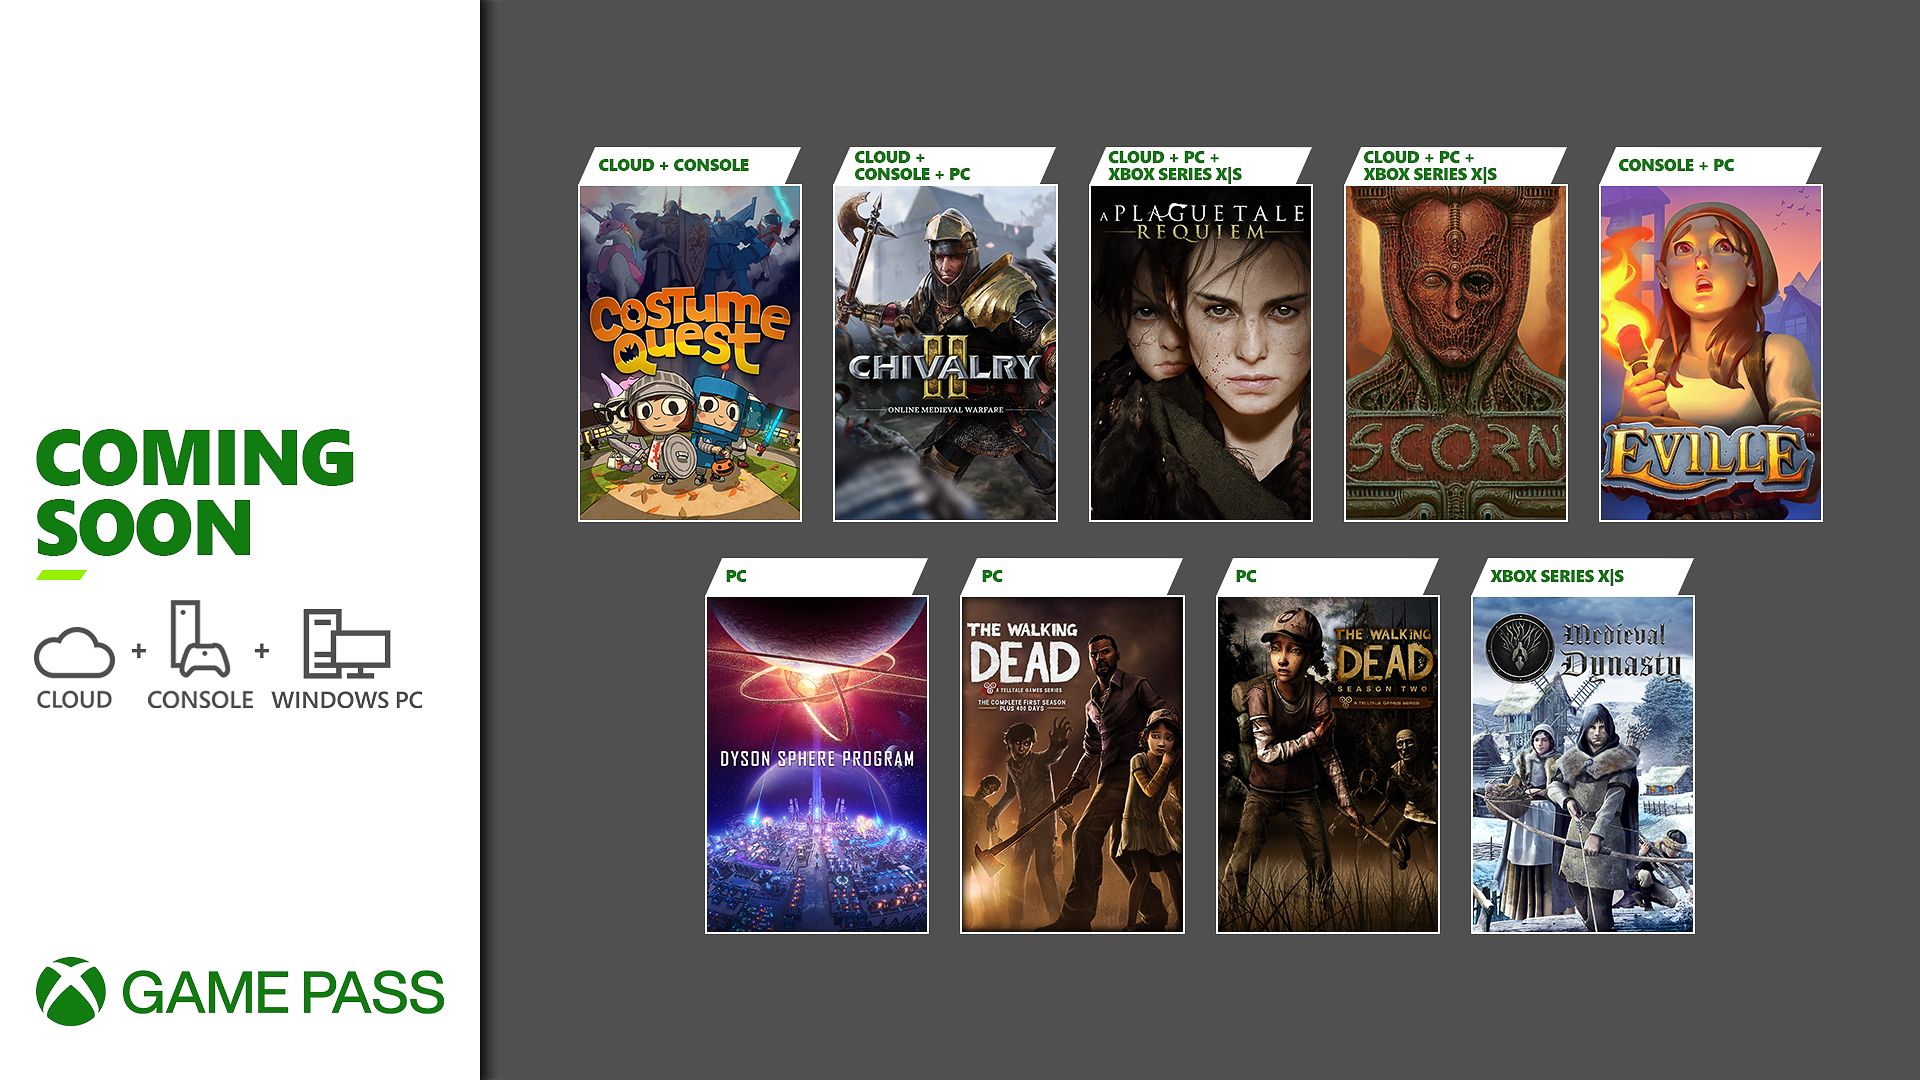 All 38 Xbox Game Pass Core games